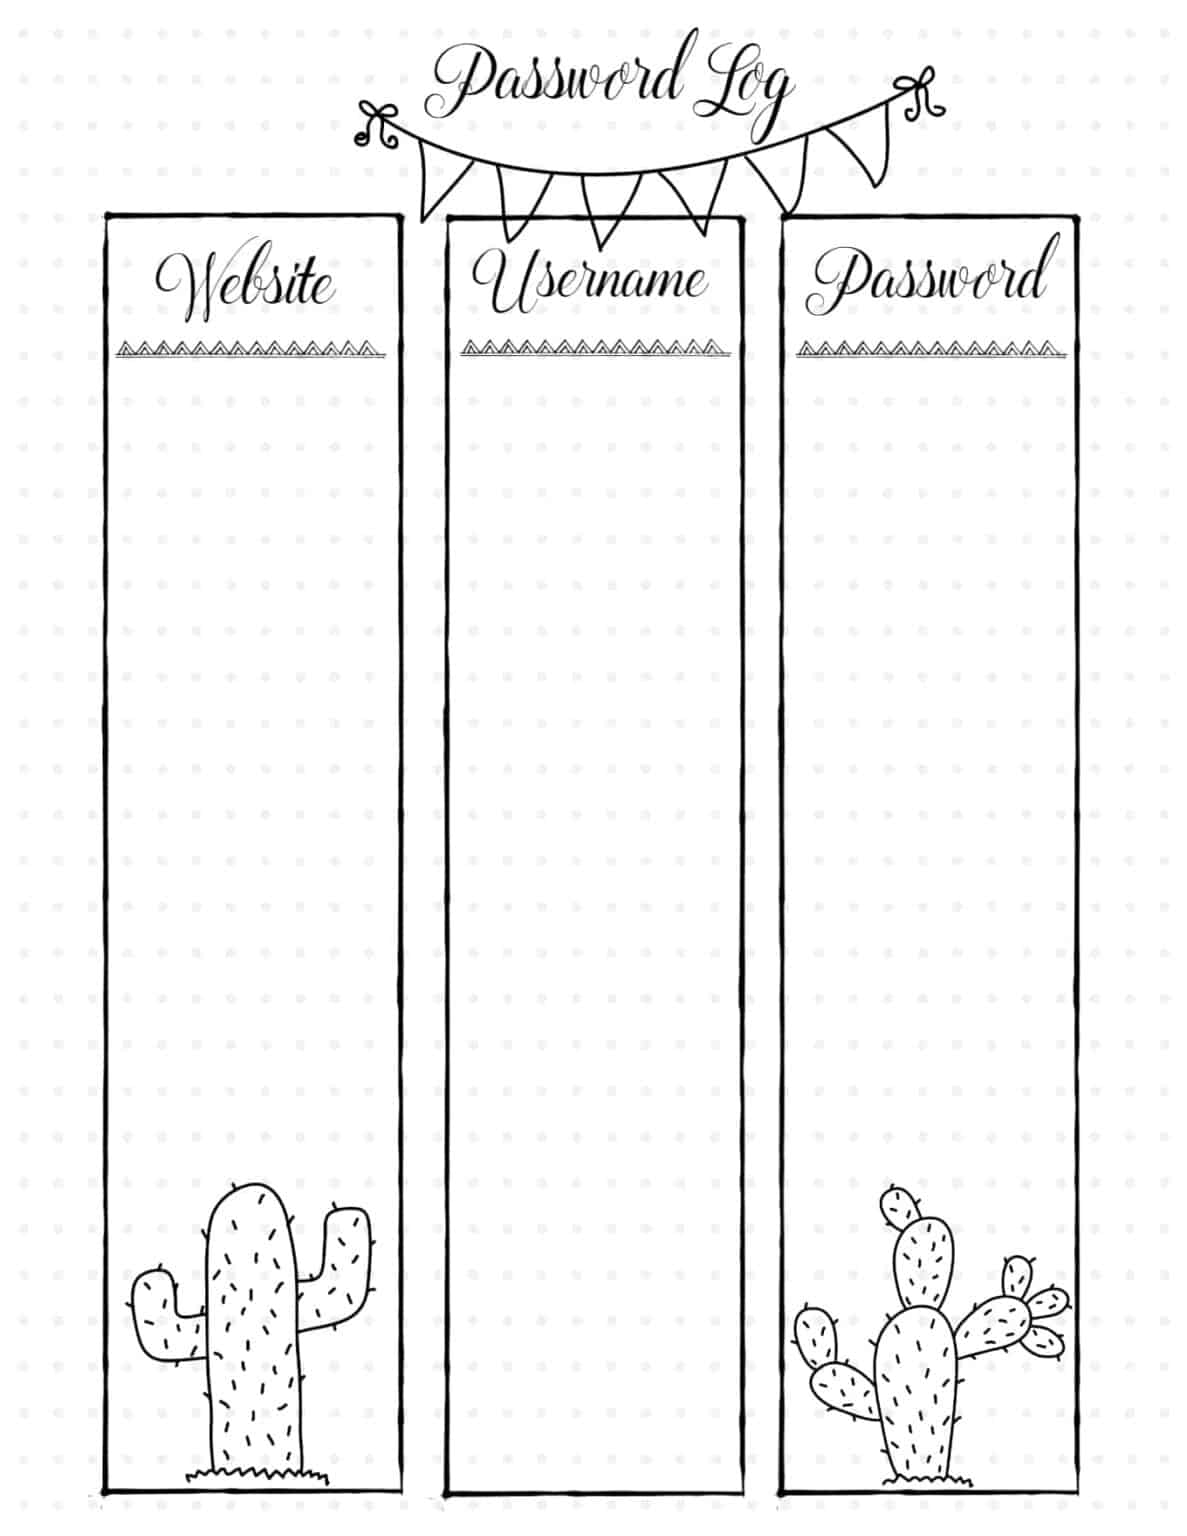 free-bullet-journal-printables-customize-online-for-any-planner-size